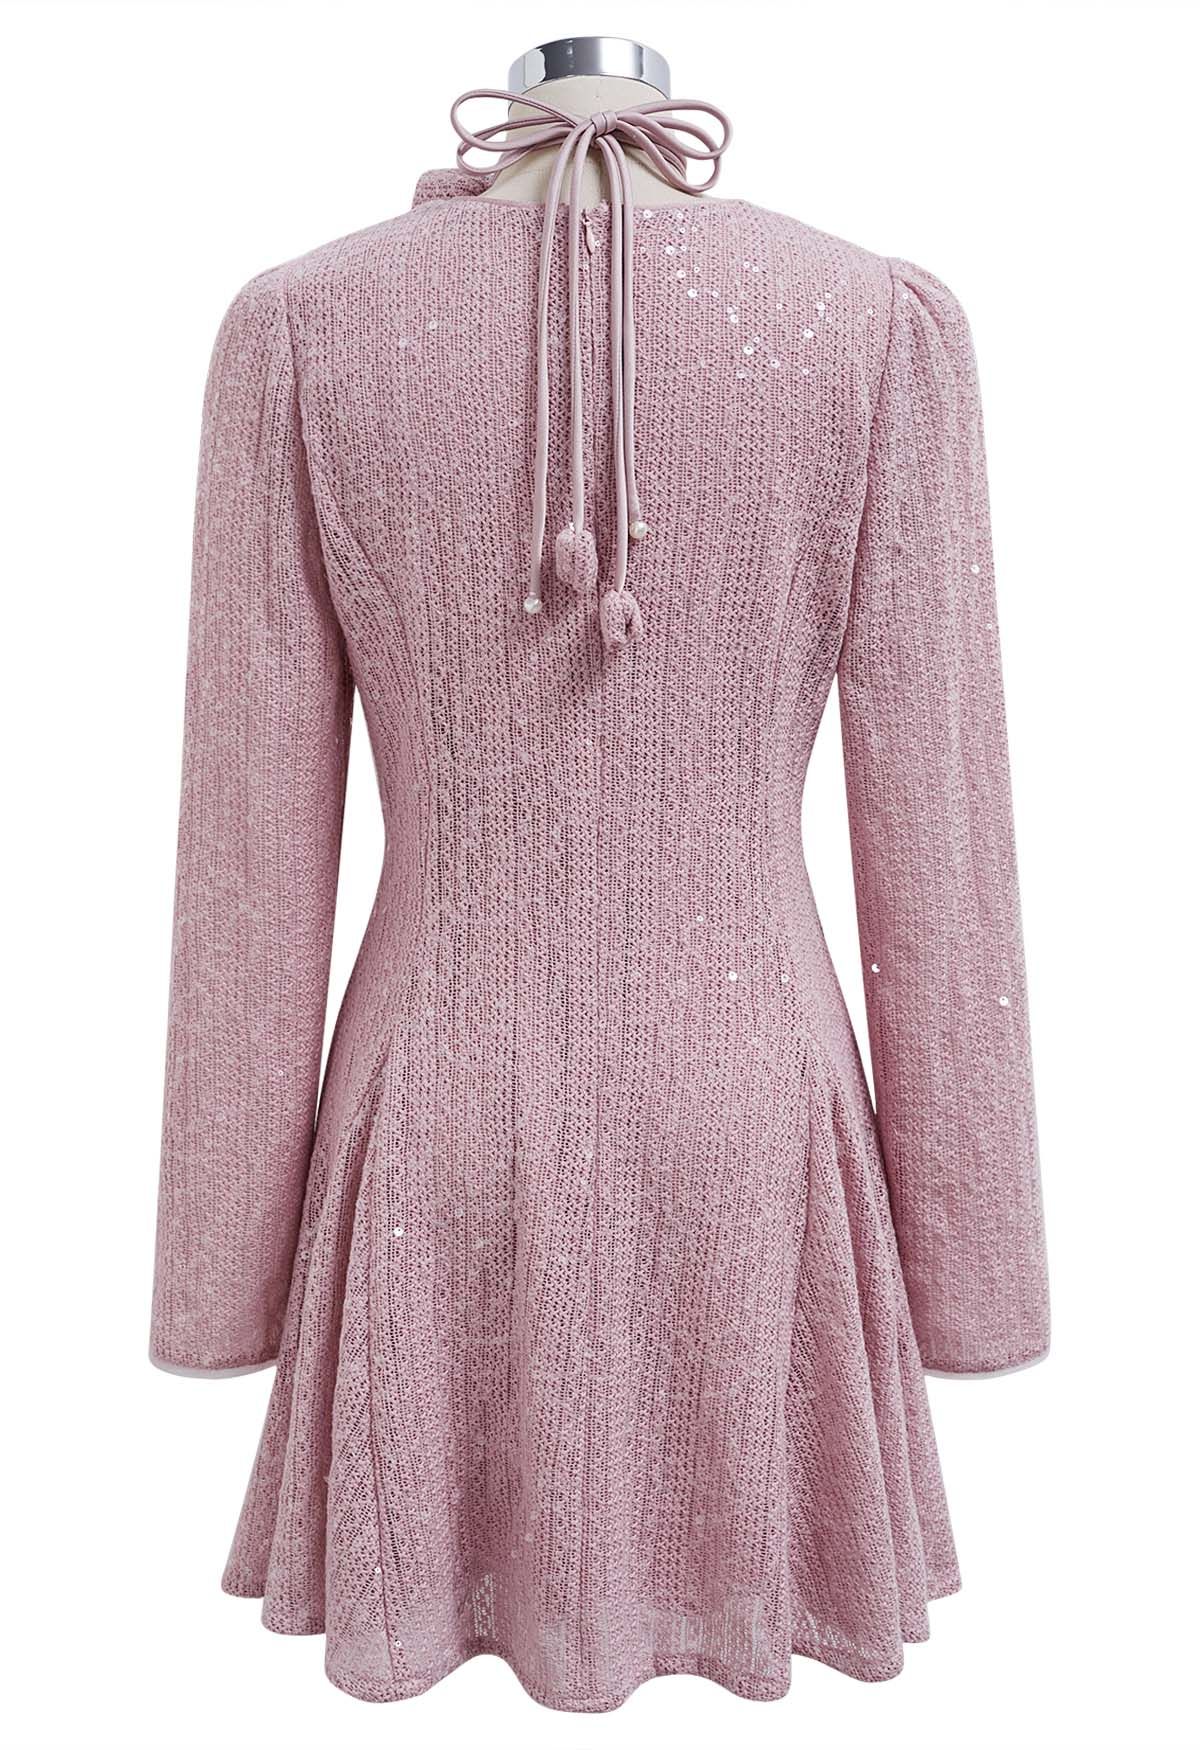 Glitter Sequin Frilling Dress with Choker in Pink